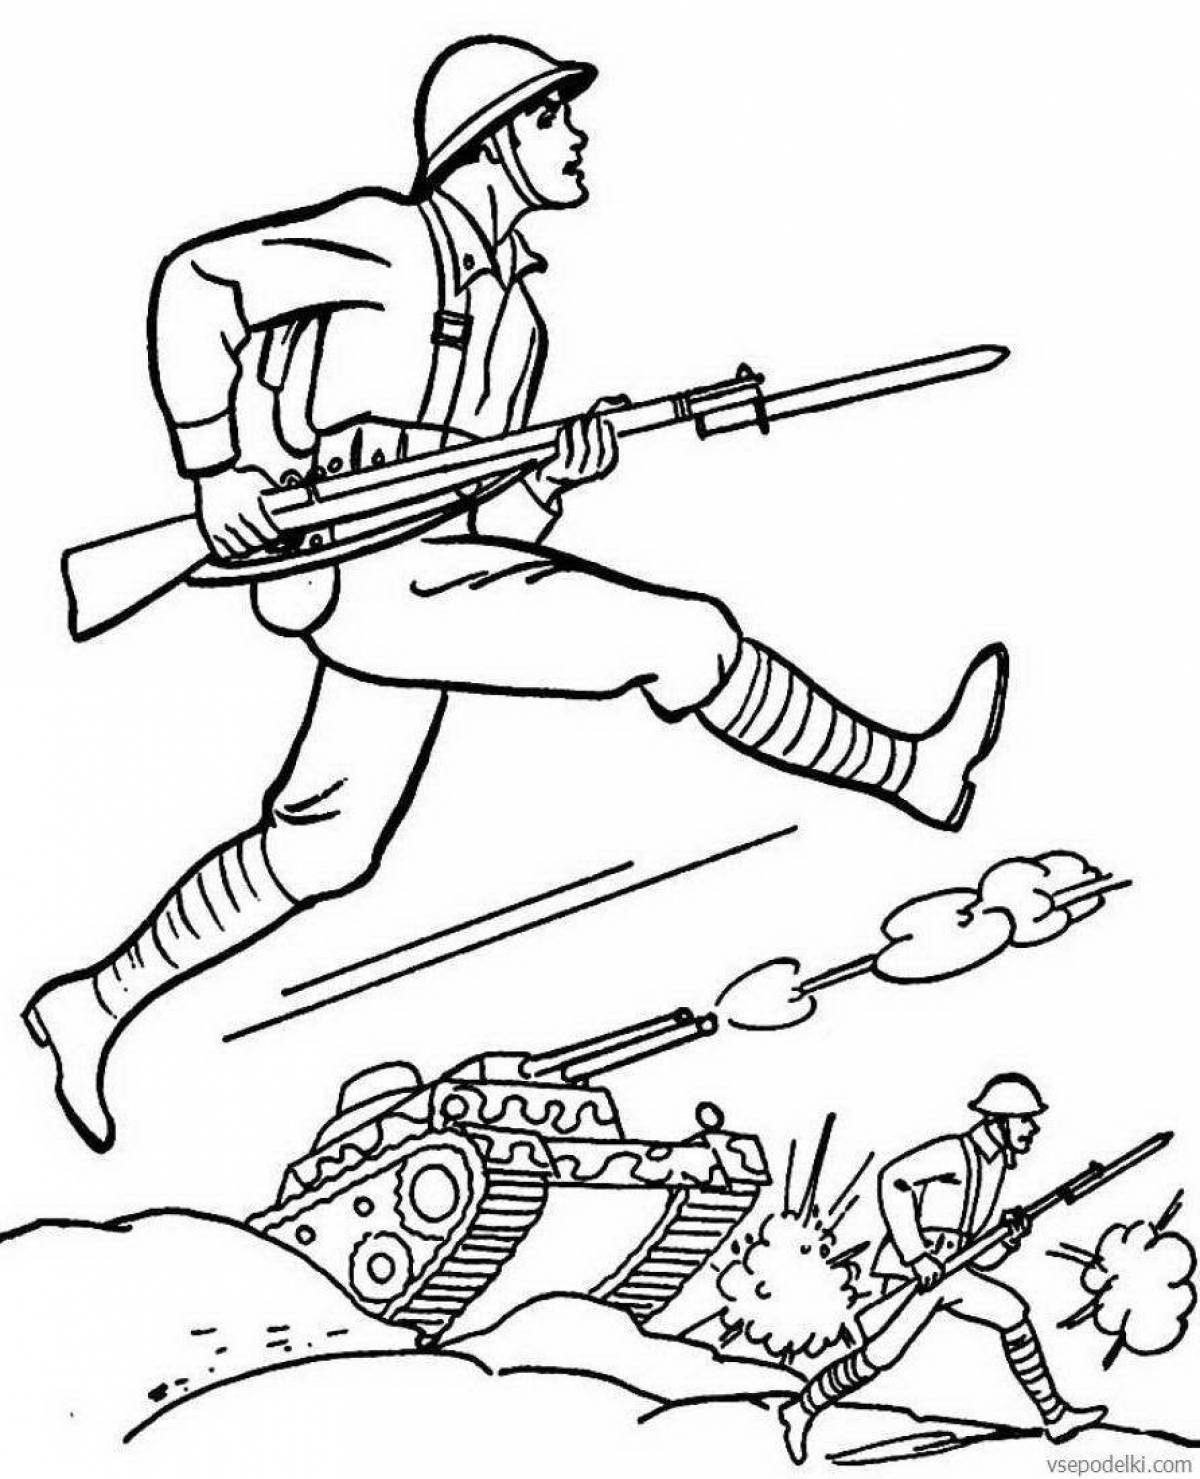 Quirky military drawing for kids